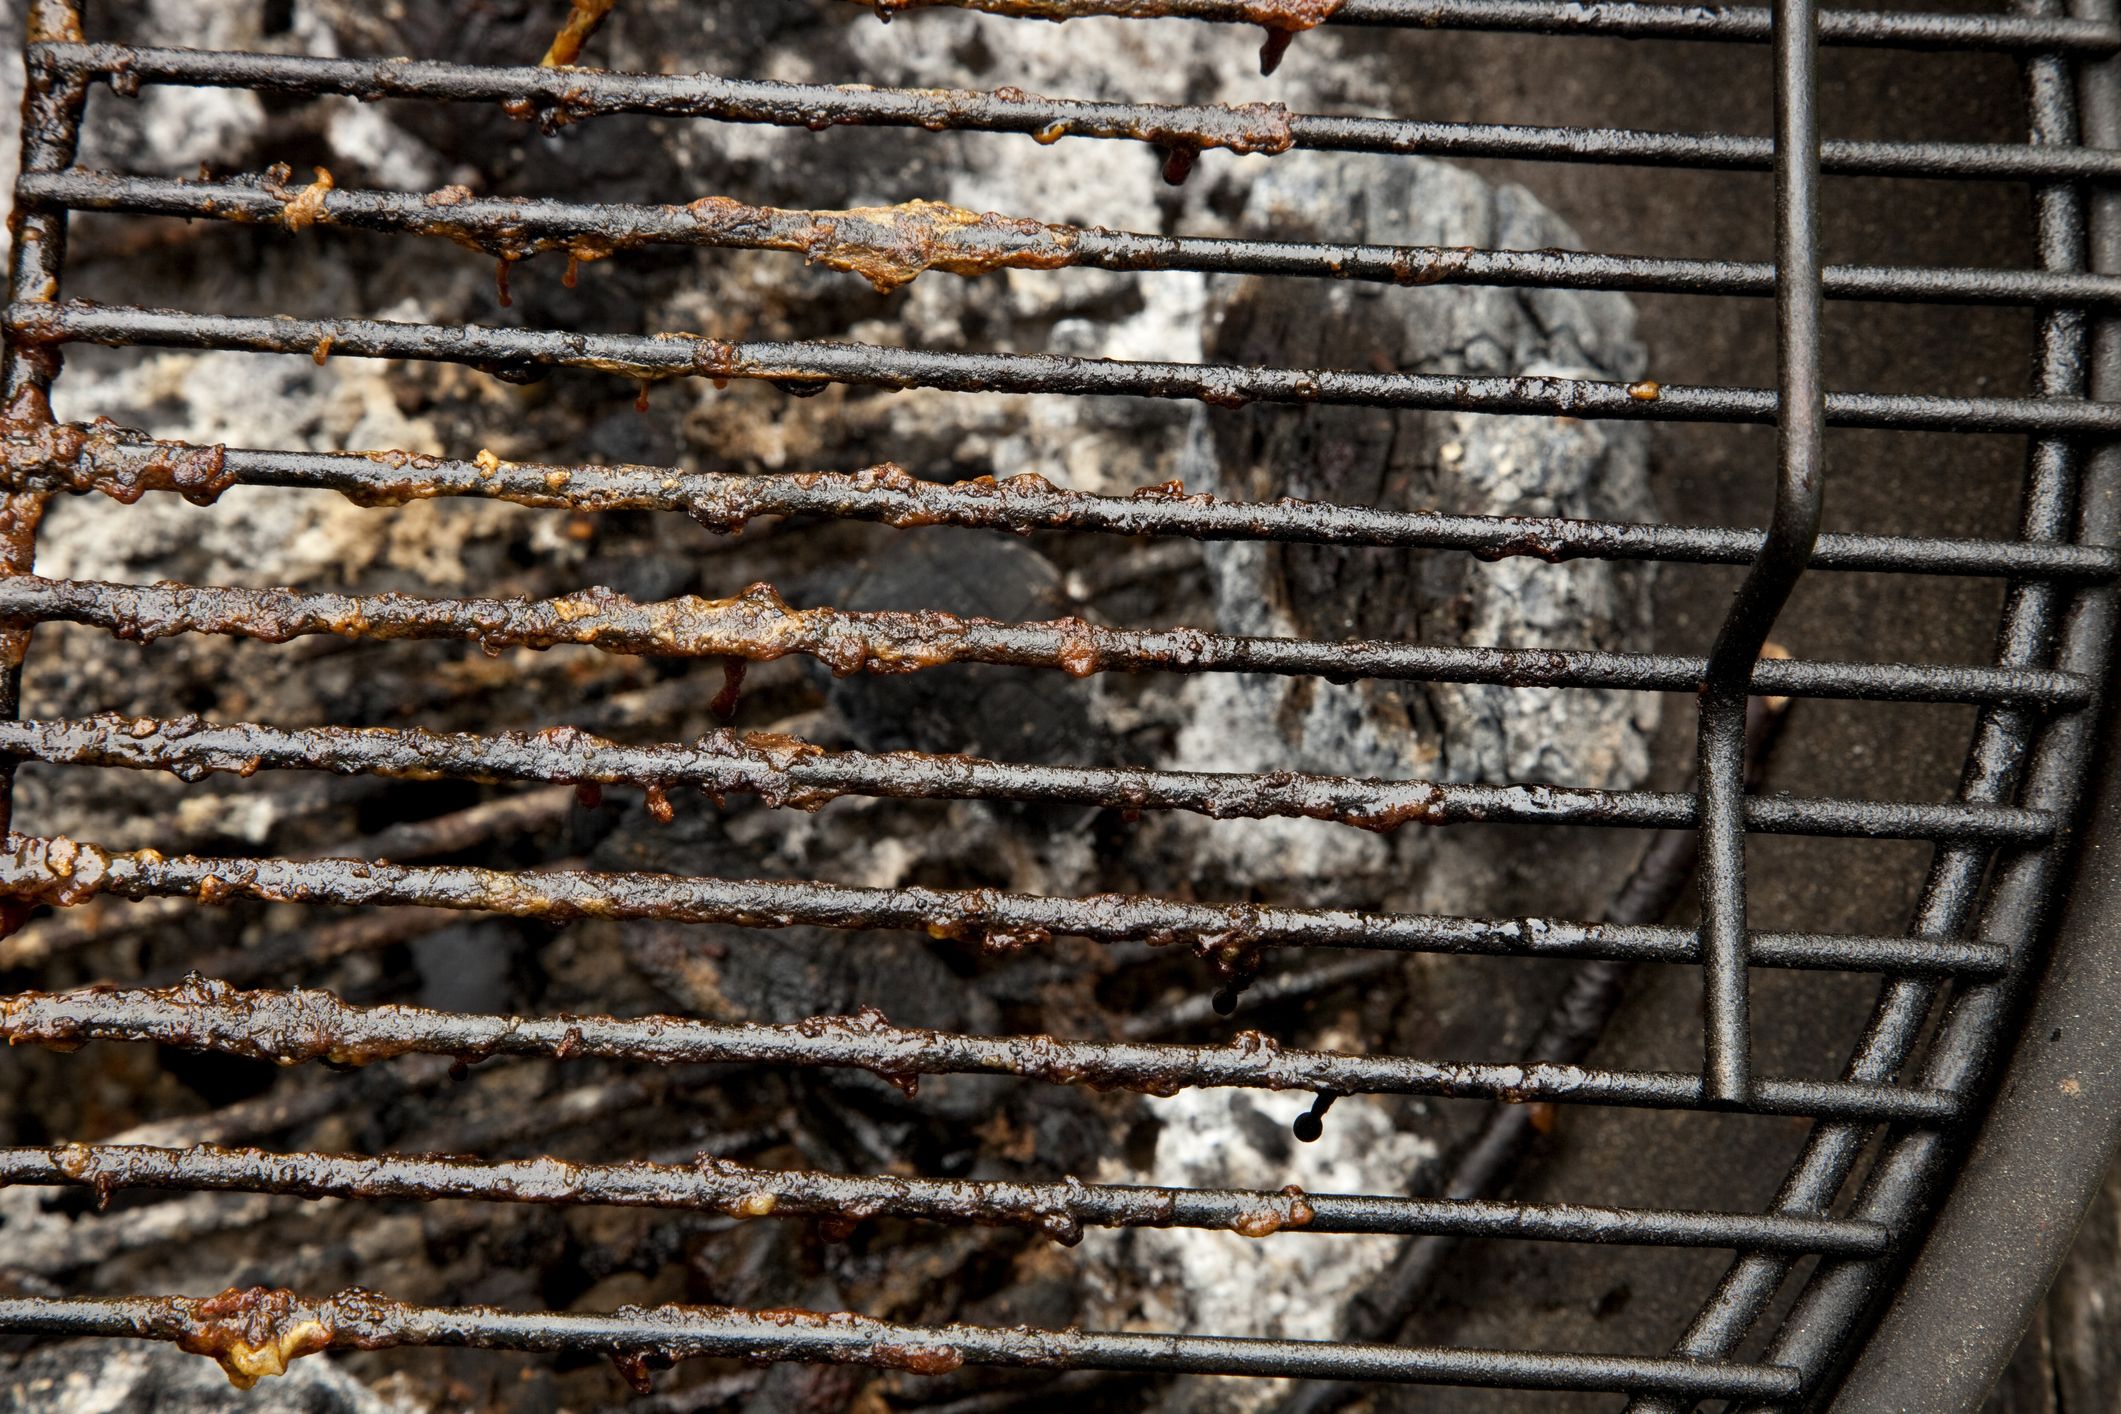 6 Signs Your Grill Is About to Catch Fire